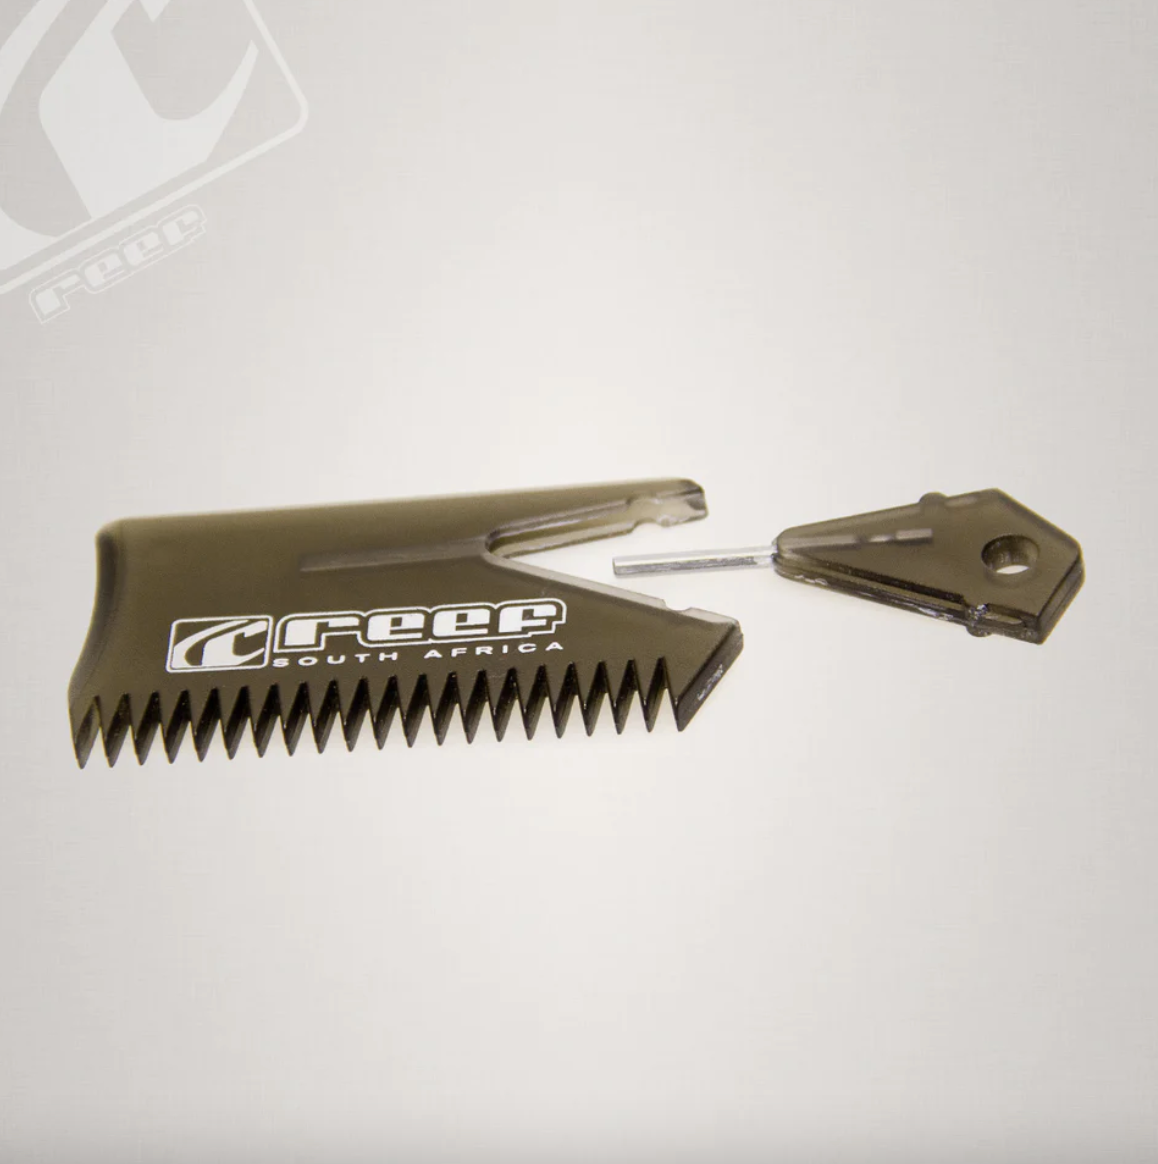 Reef Wax Comb with Key